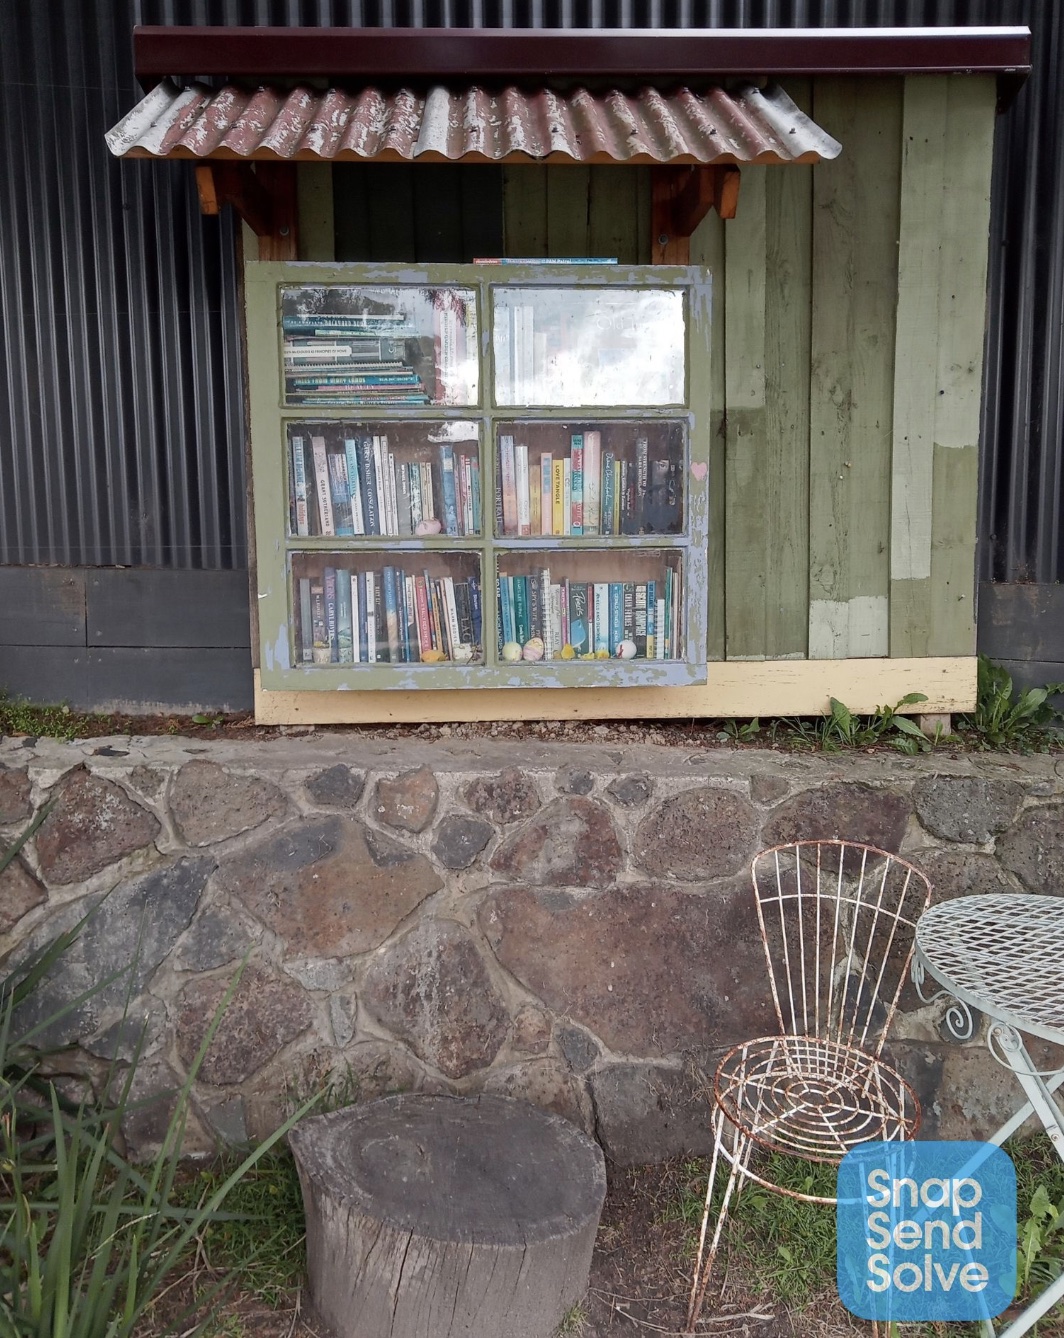 A Street Library covered by a garbage bag to protect it from the weather